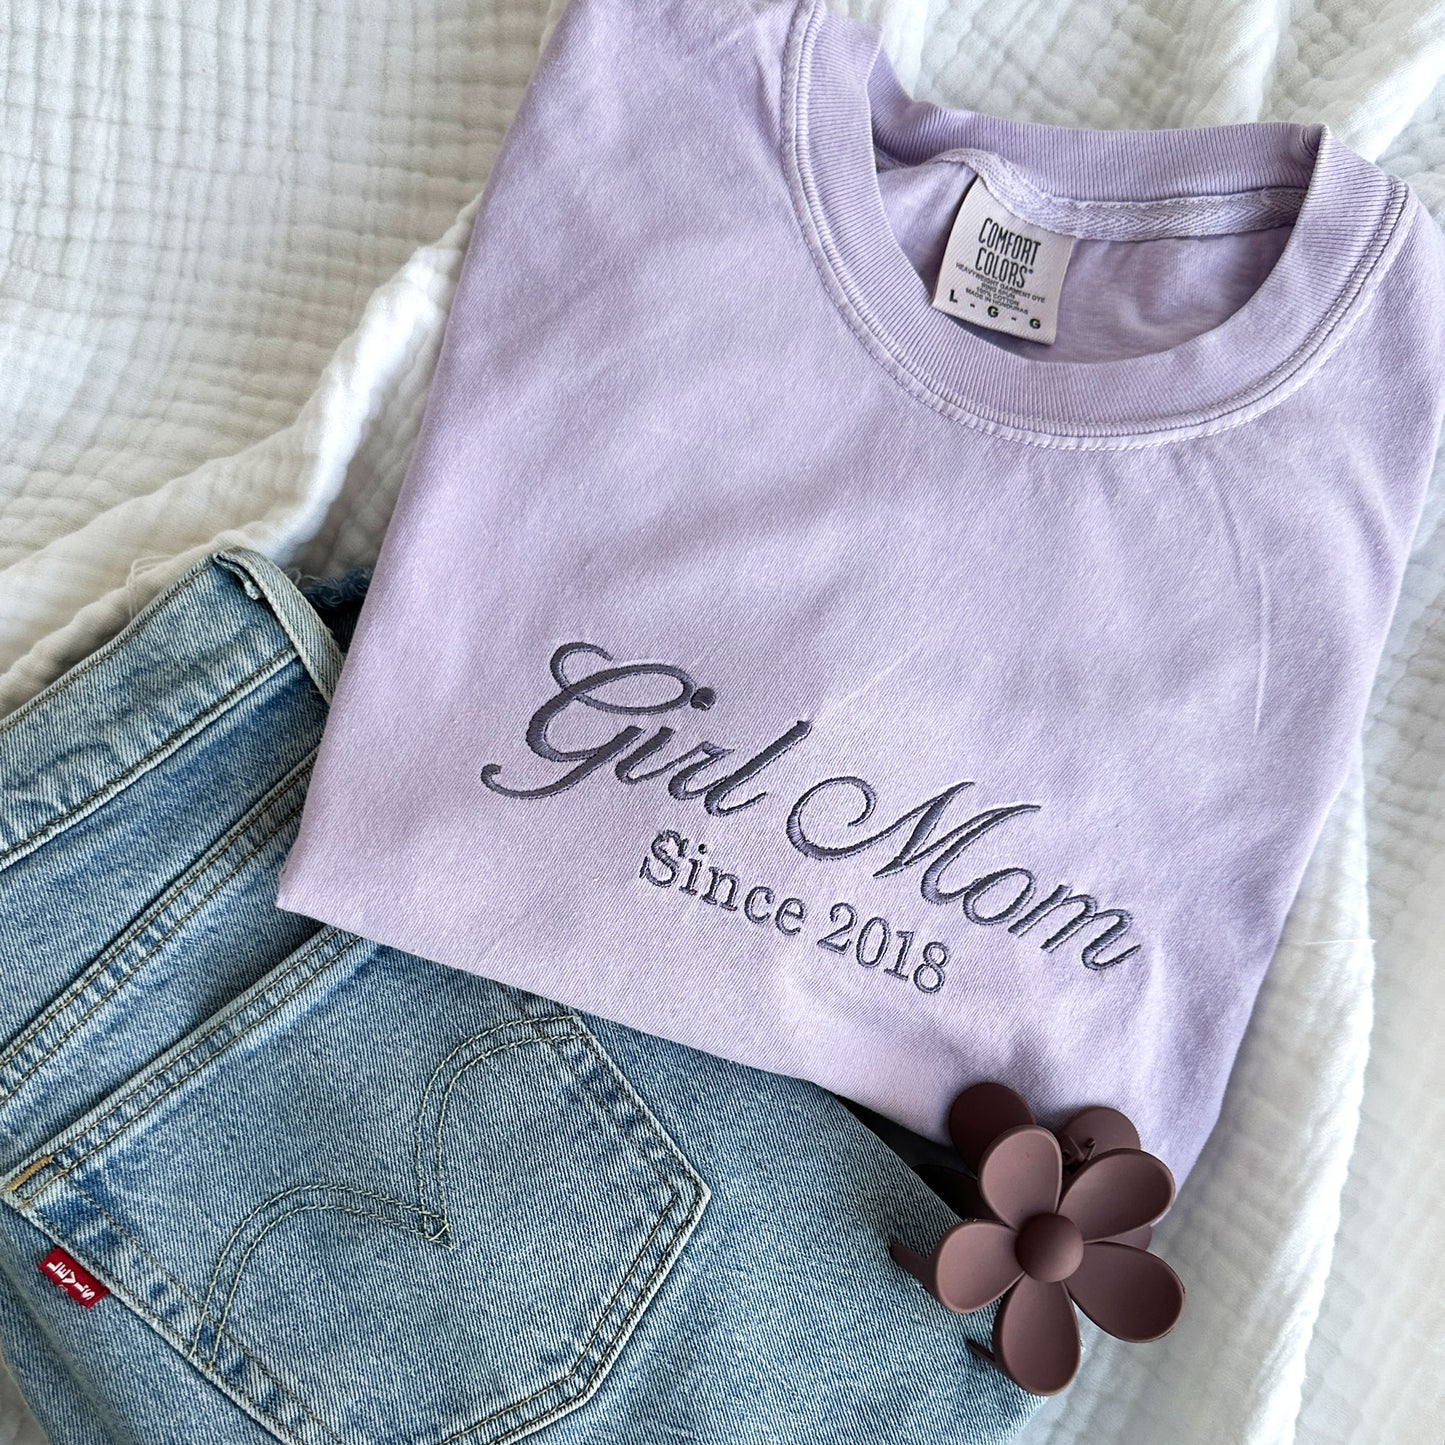 Orchid comfort colors t-shirt with embroidered Girl Mom since custom date design across the chest in smoky orchid thread. Styled with jeans and a flower hair clip